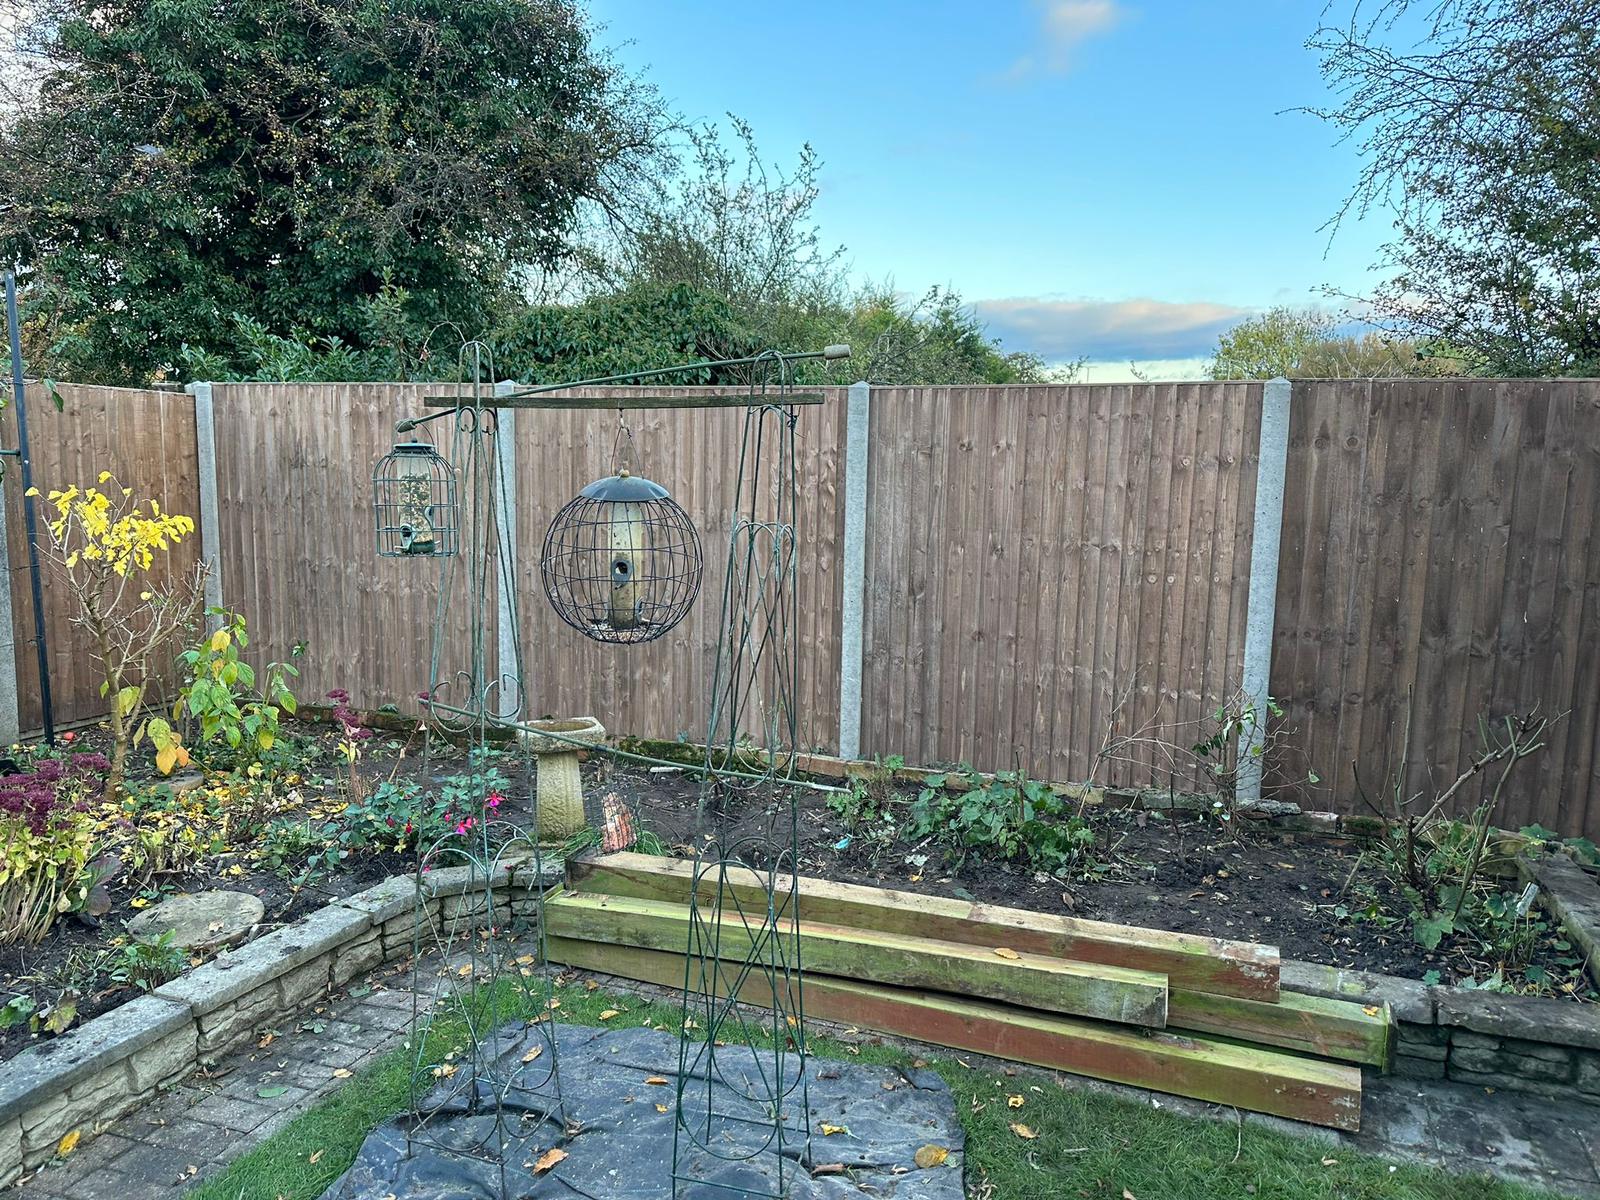 An image showing new Fence Panels and Posts installed in a back garden.